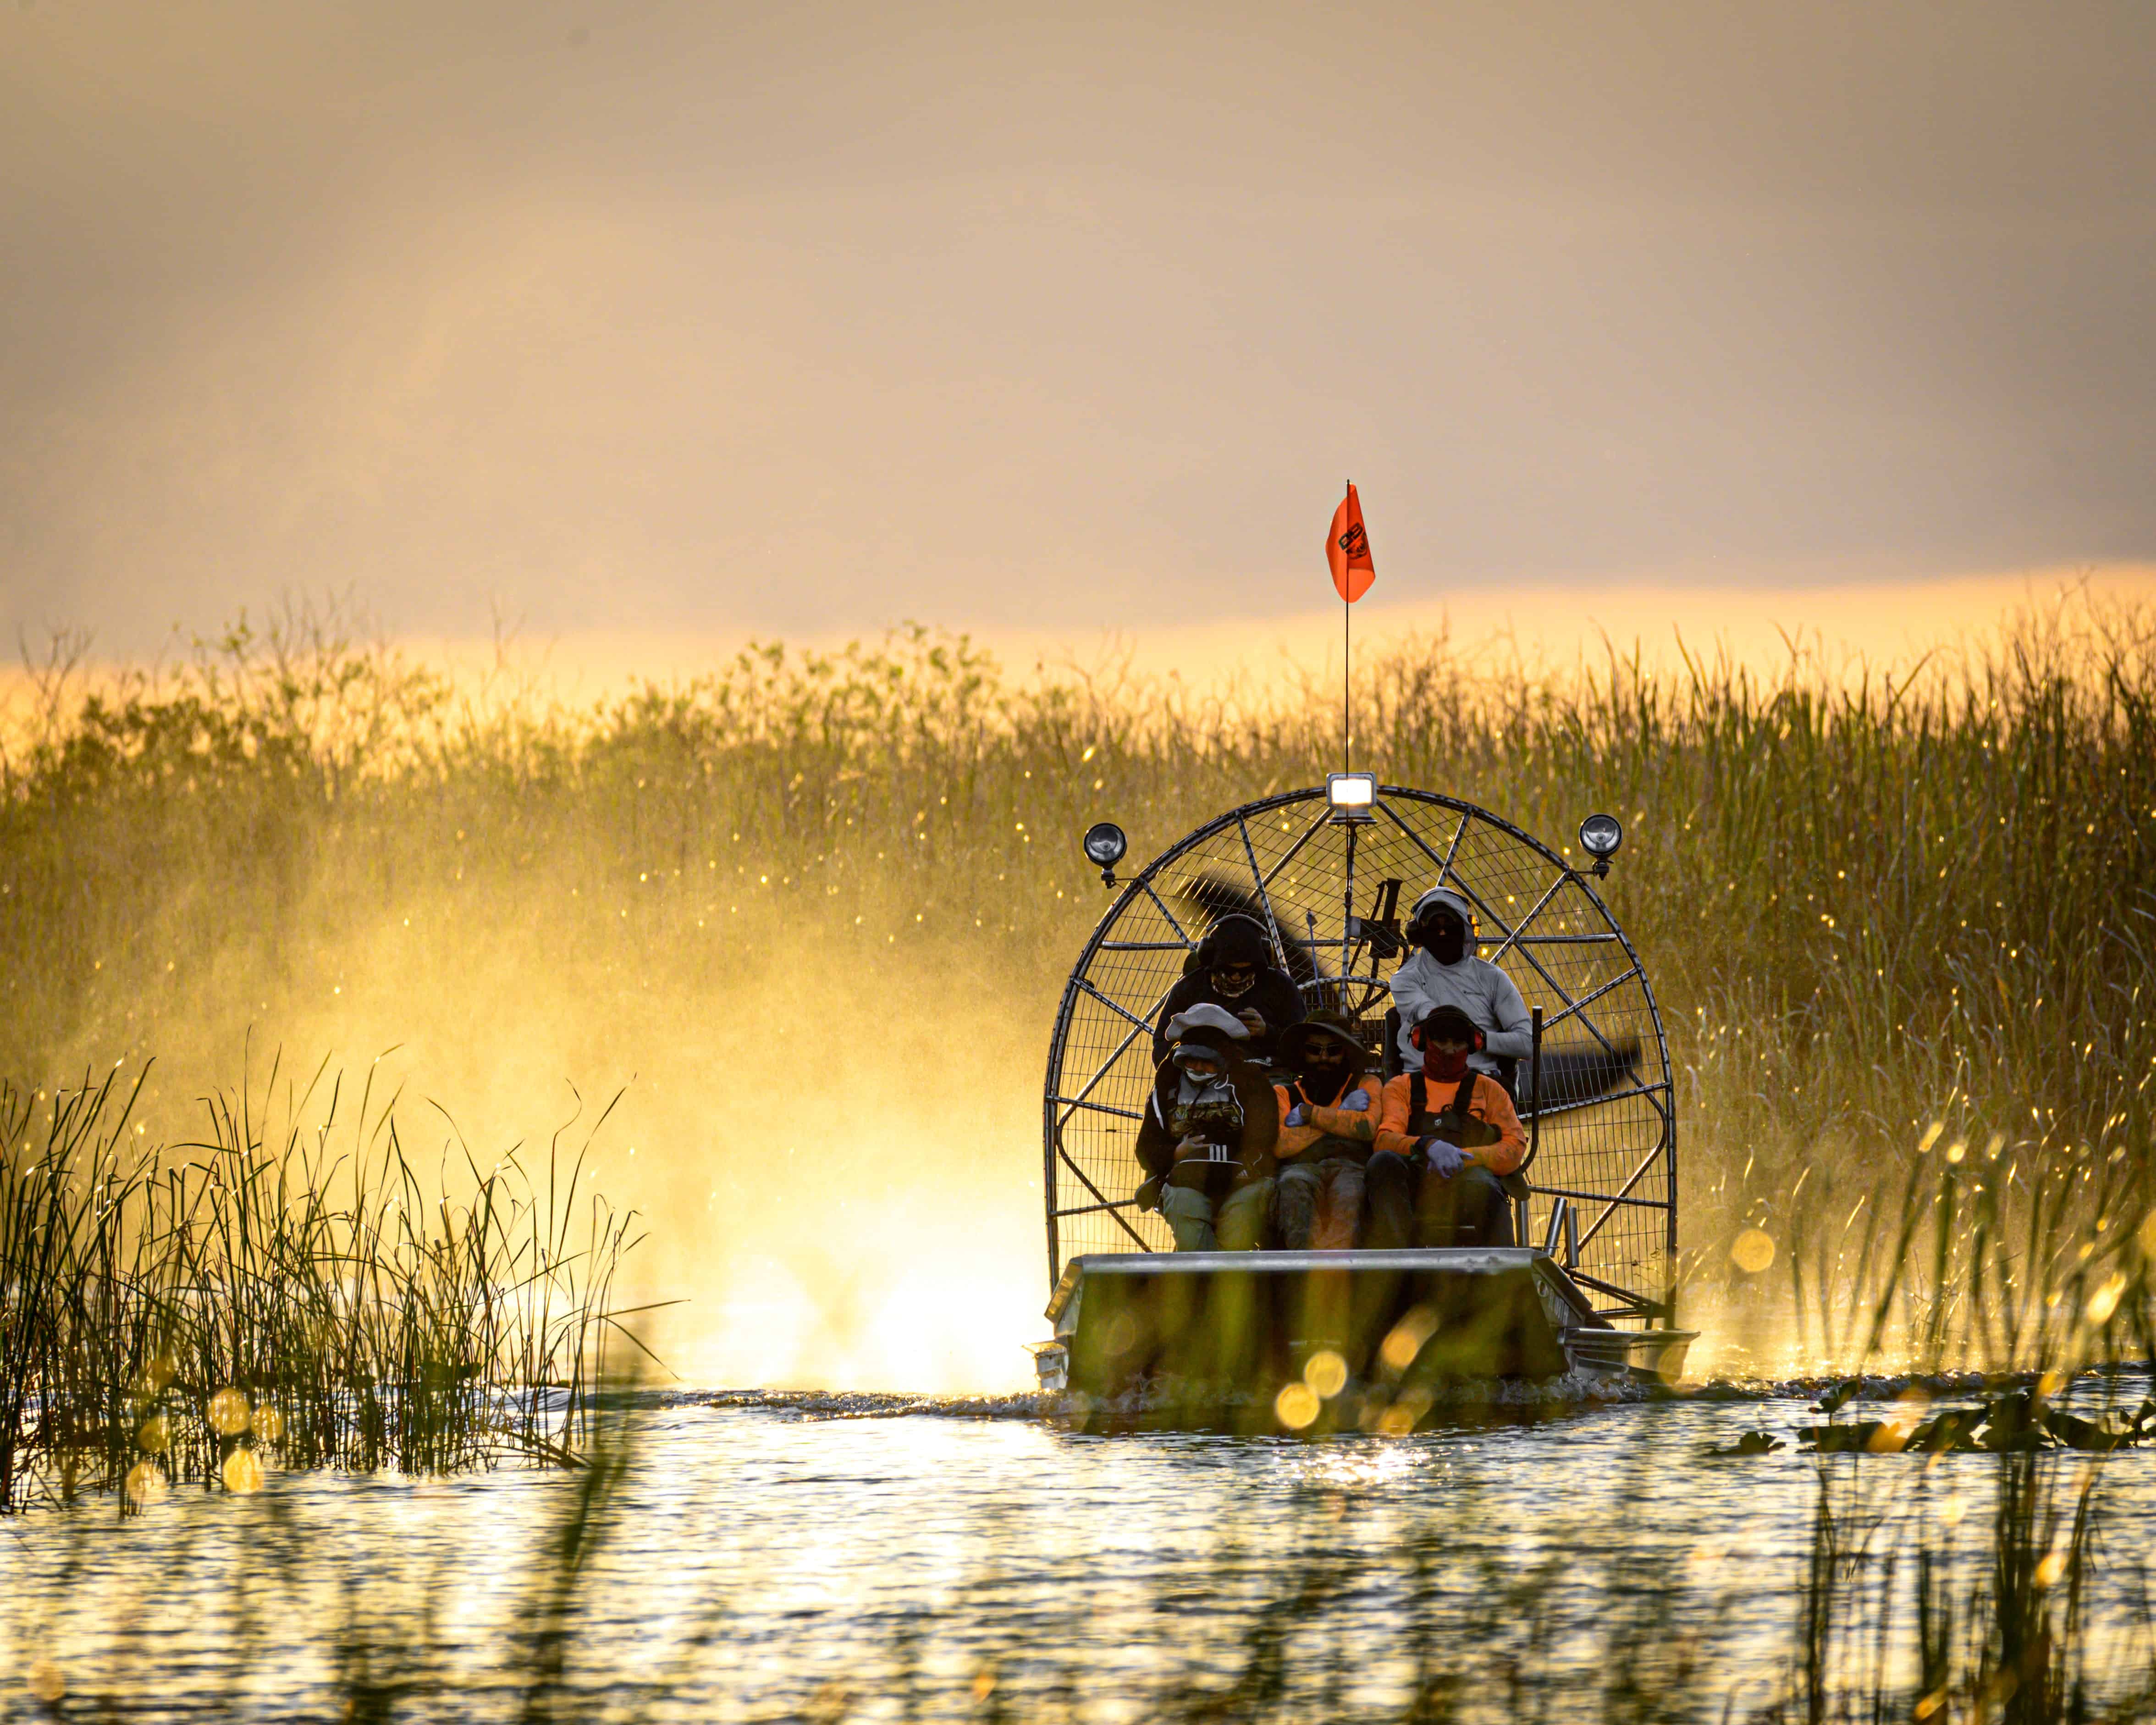 Taking an airboat tour in the Everglades